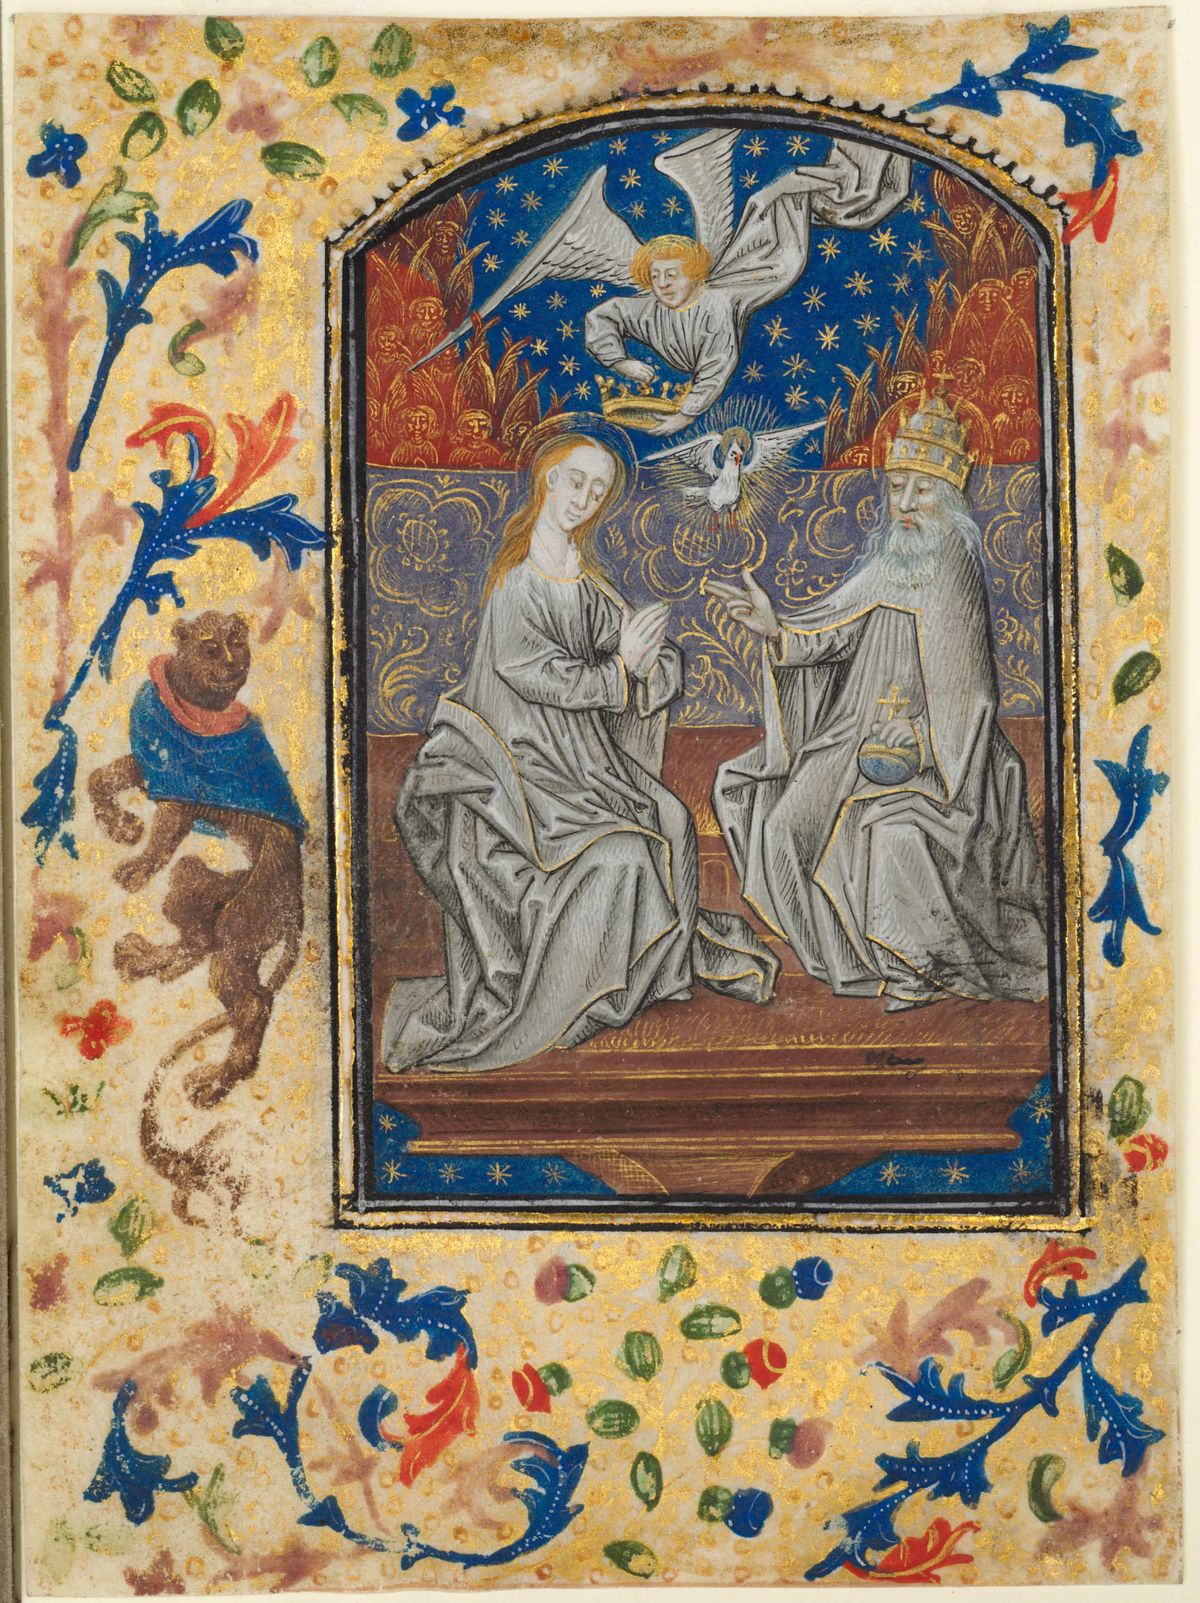 Leaf from a Book of Hours: Coronation of the Virgin (1470-1480) by Guillaume Vrelant - Public Domain Catholic Painting